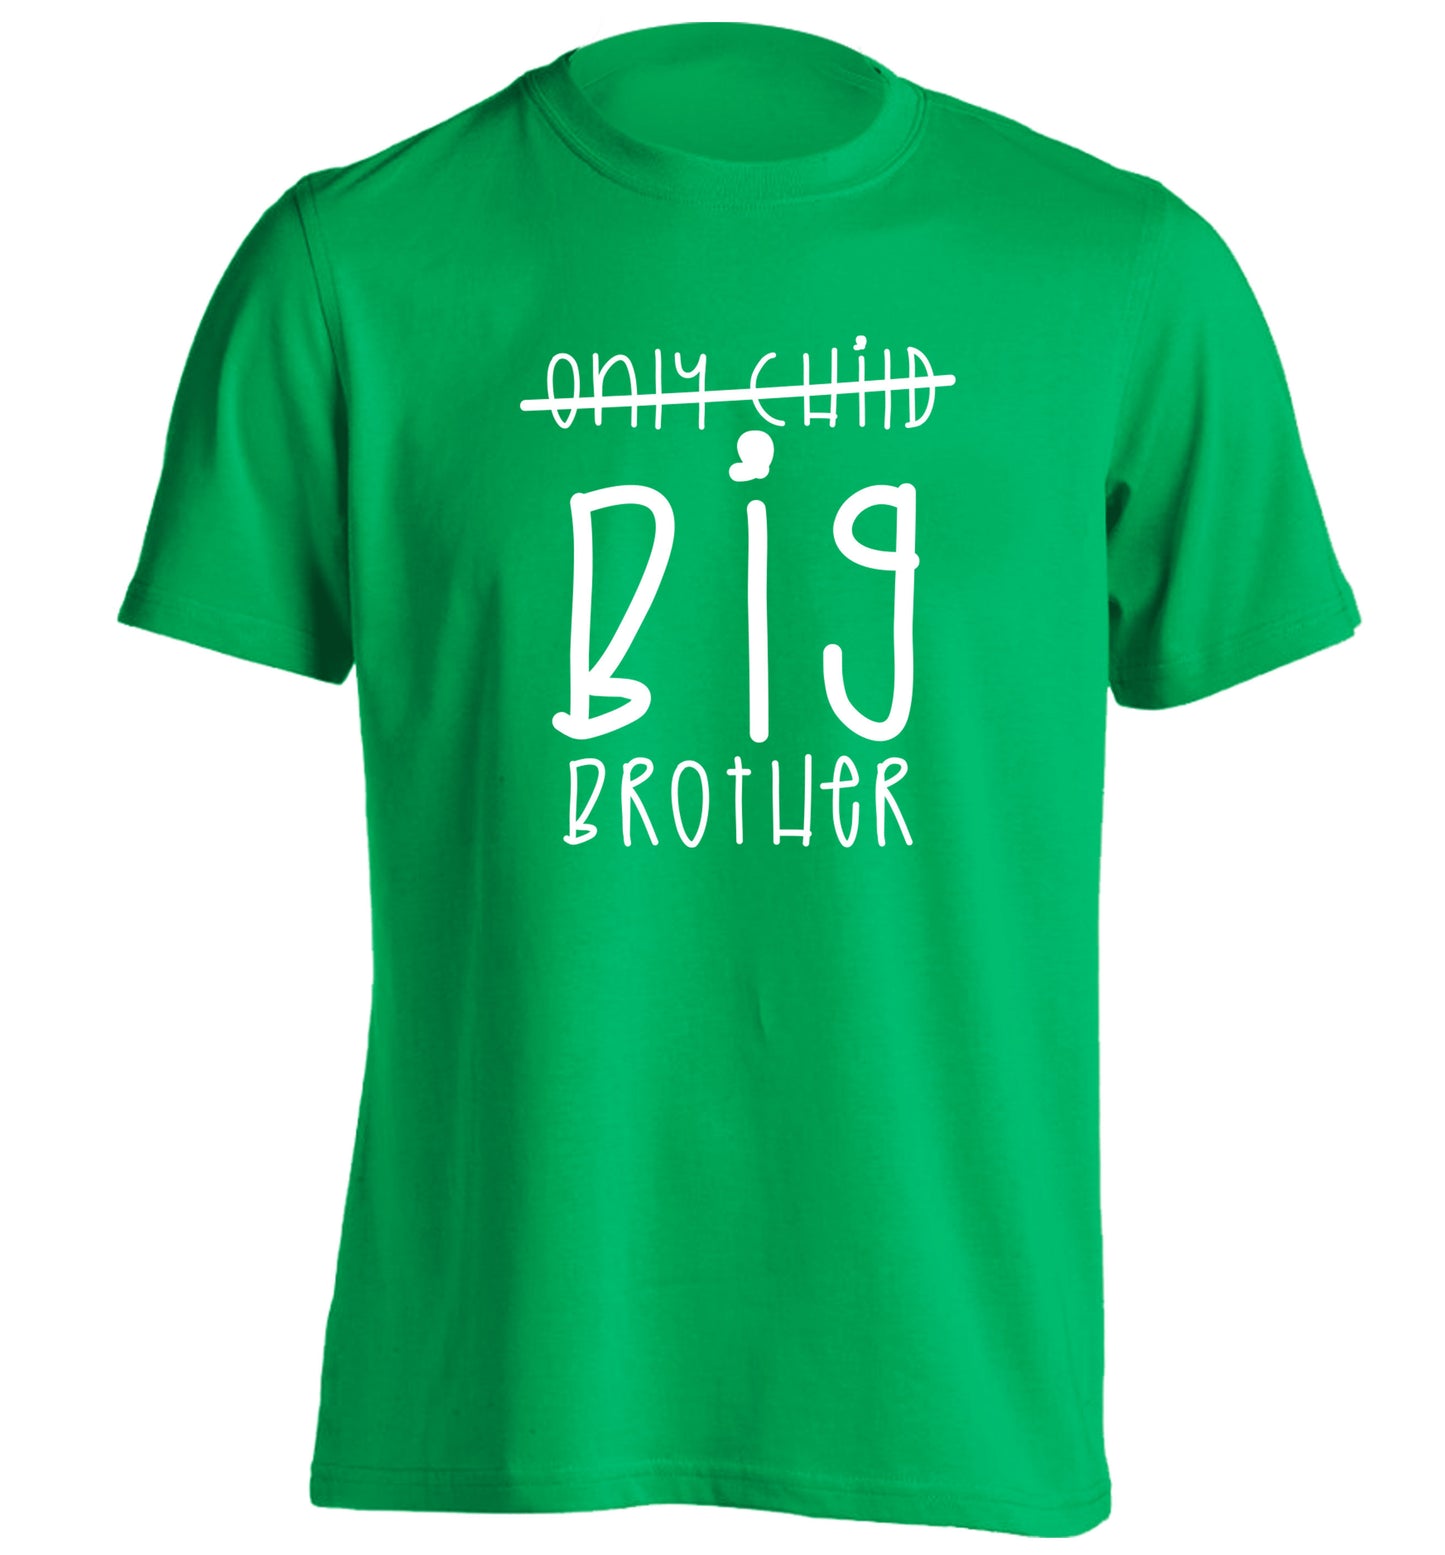 Only child big brother adults unisex green Tshirt 2XL